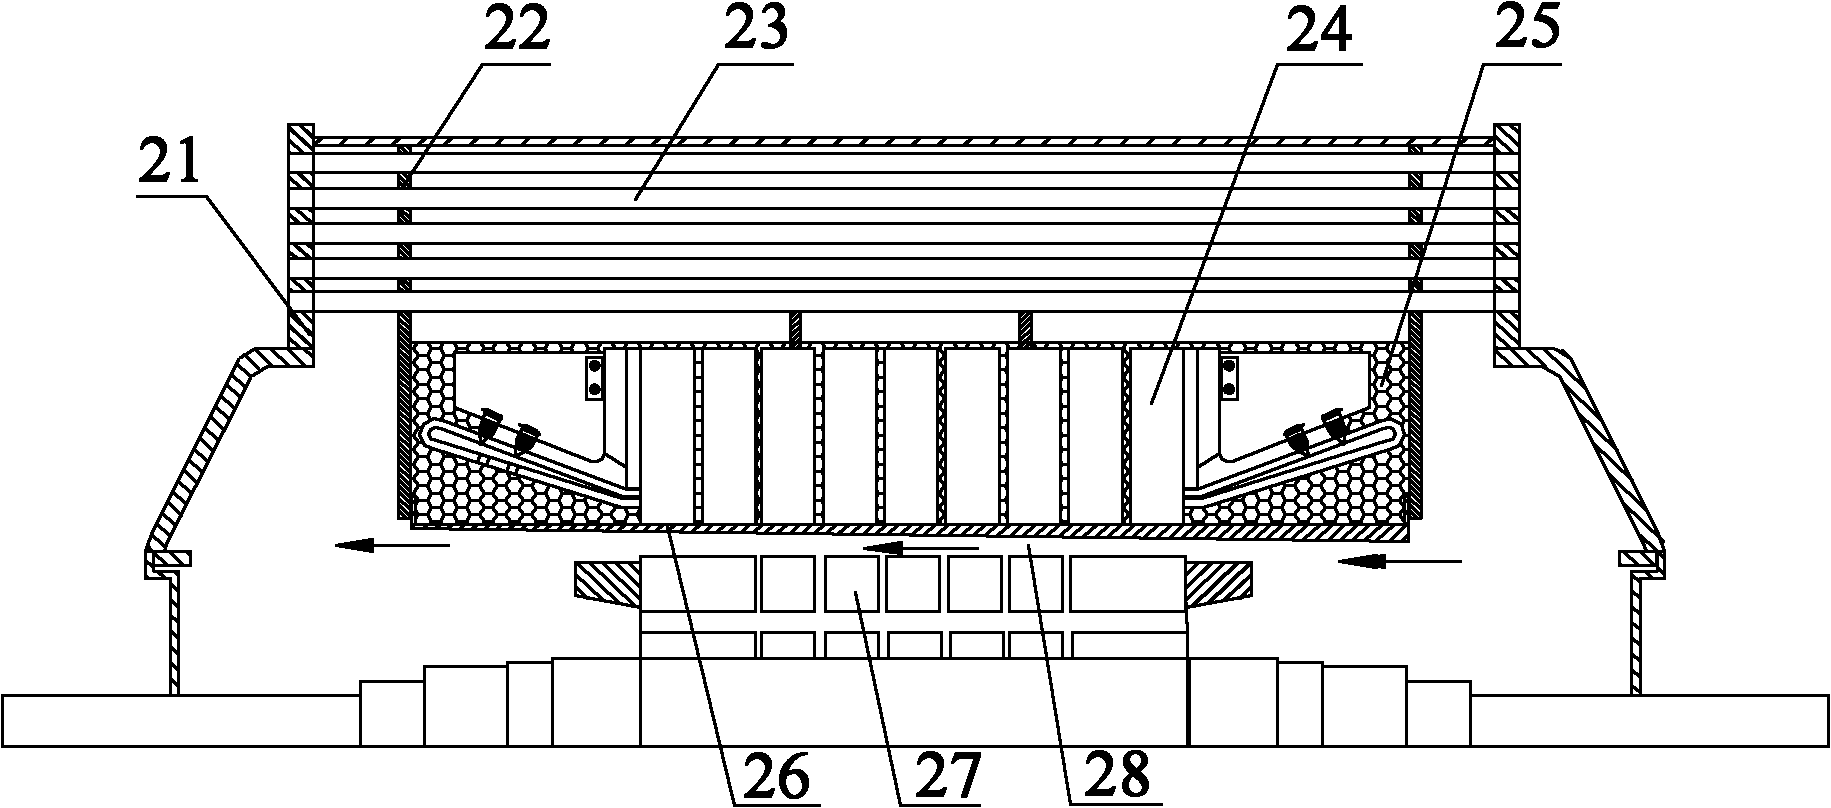 Motor air cooling structure and horizontal motor